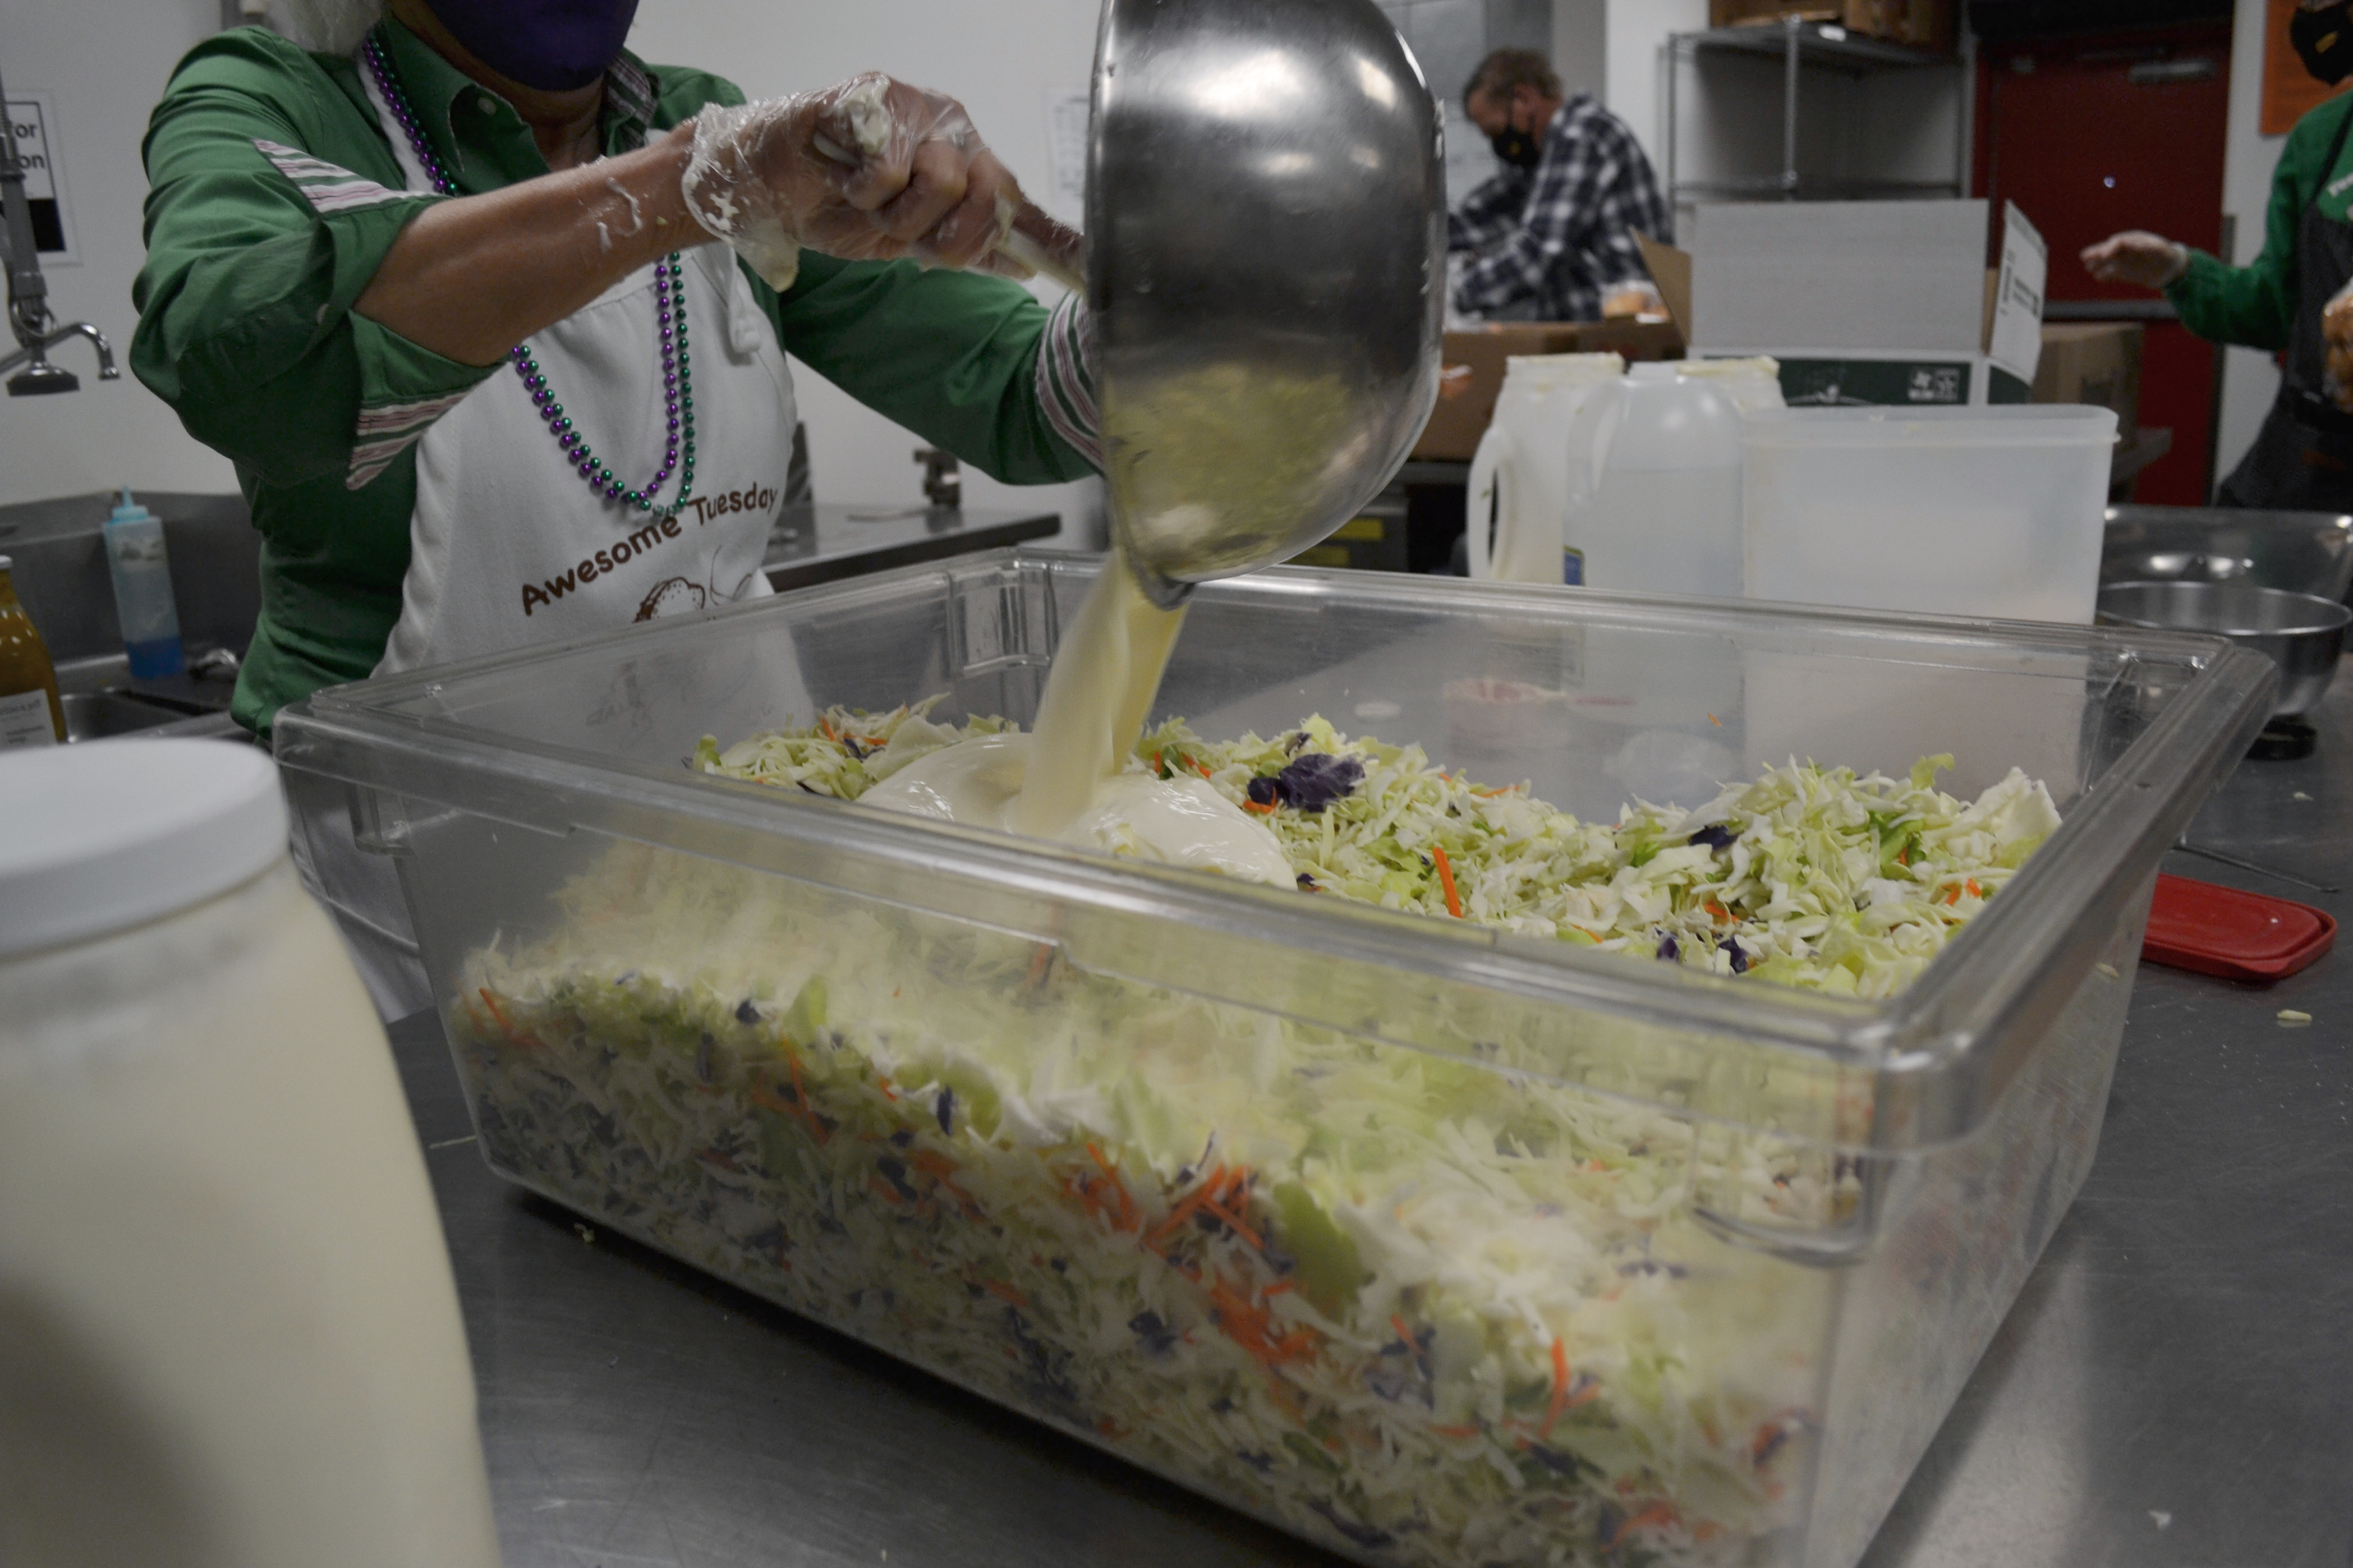 A volunteer pours coleslaw sauce on top of shredded cabbage. Photo by Alyssa Buckley.